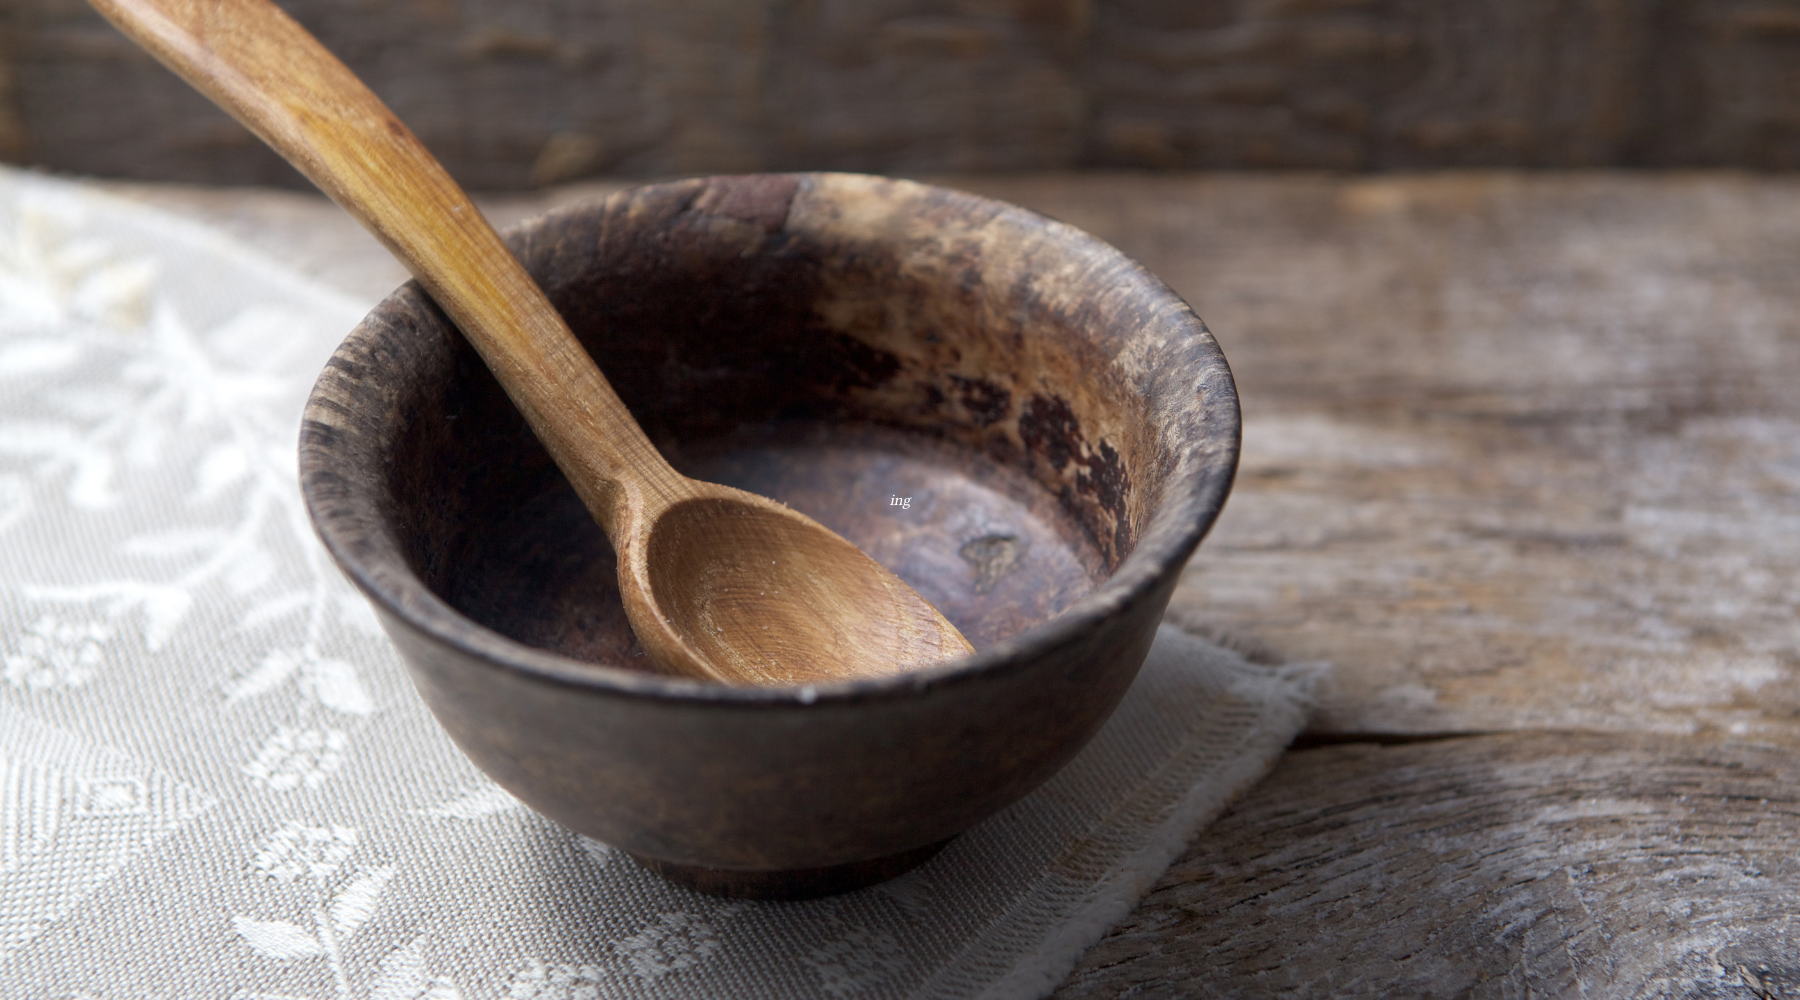 Fasting, Image Shows Empty Wooden Bowl with Spoon | Oxford Healthspan